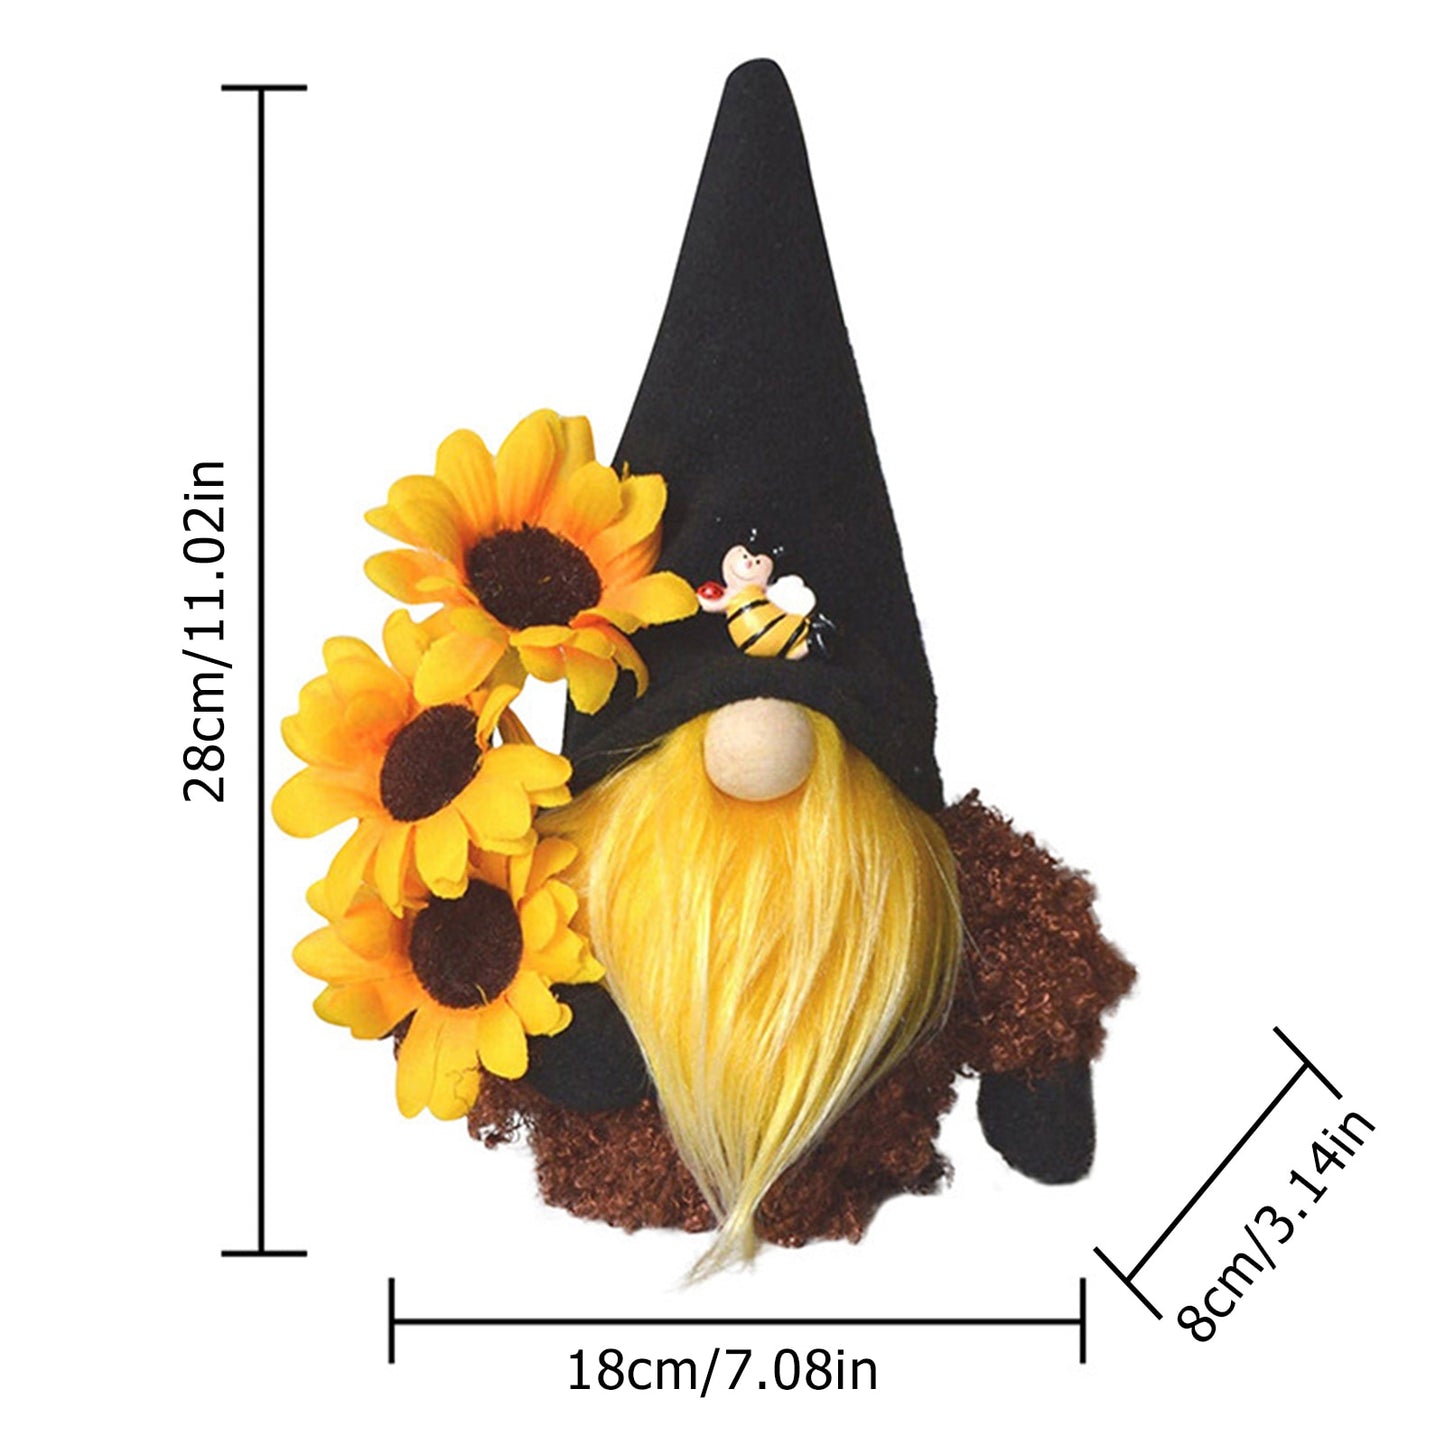 Sunflowers Faceless  Decor Ornaments Bee  Desktop Decoration Ornaments for Home Festivel Party Gifts